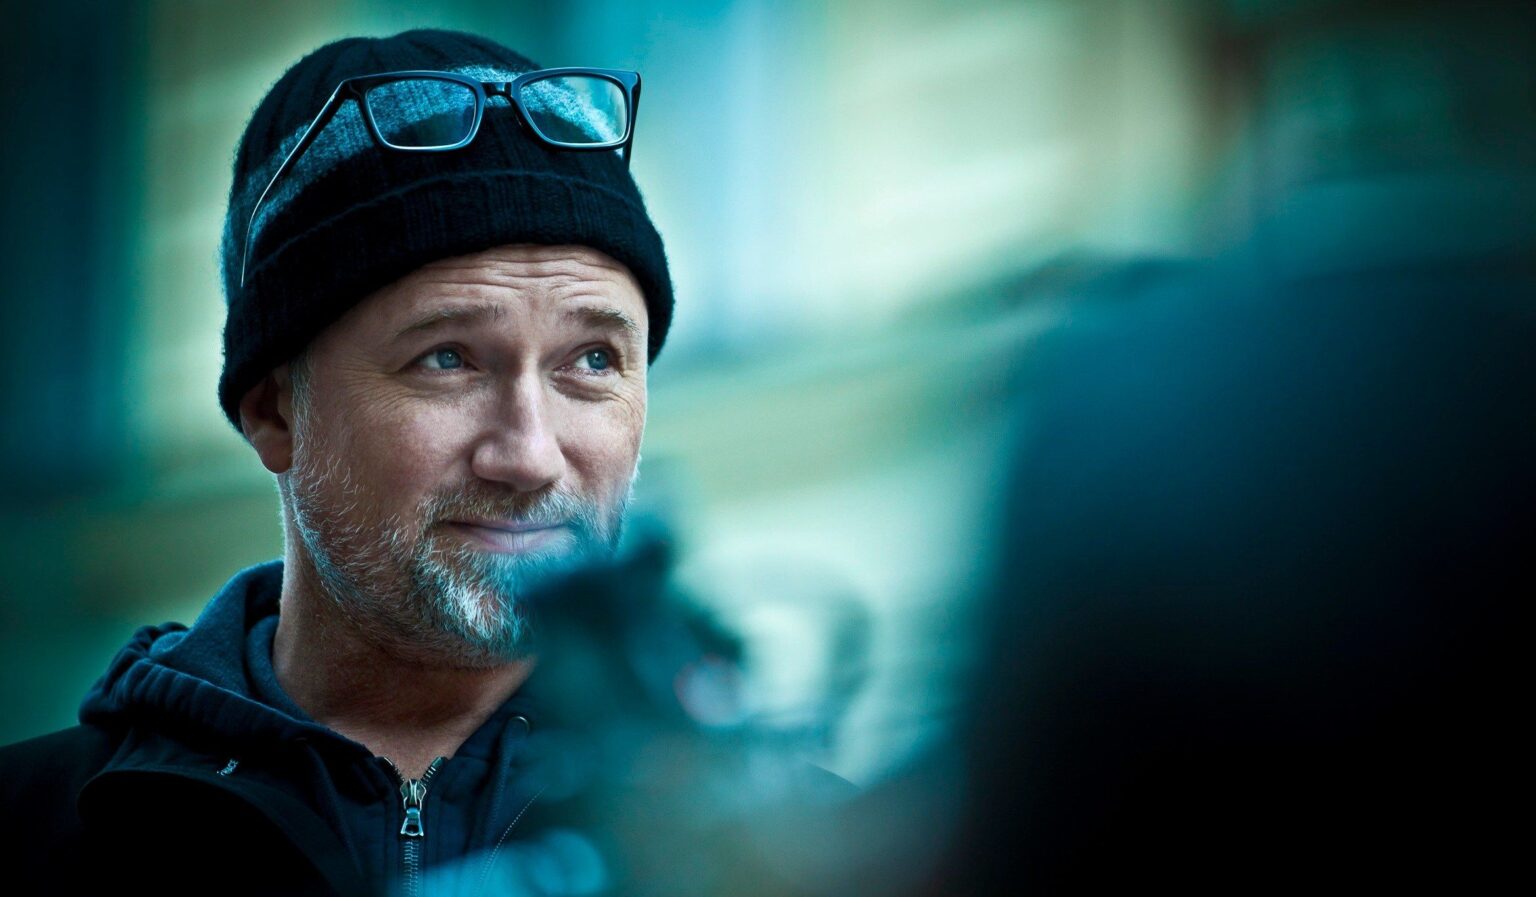 David Fincher is working with Netflix now. What are we most likely to see from the director on the streaming platform?